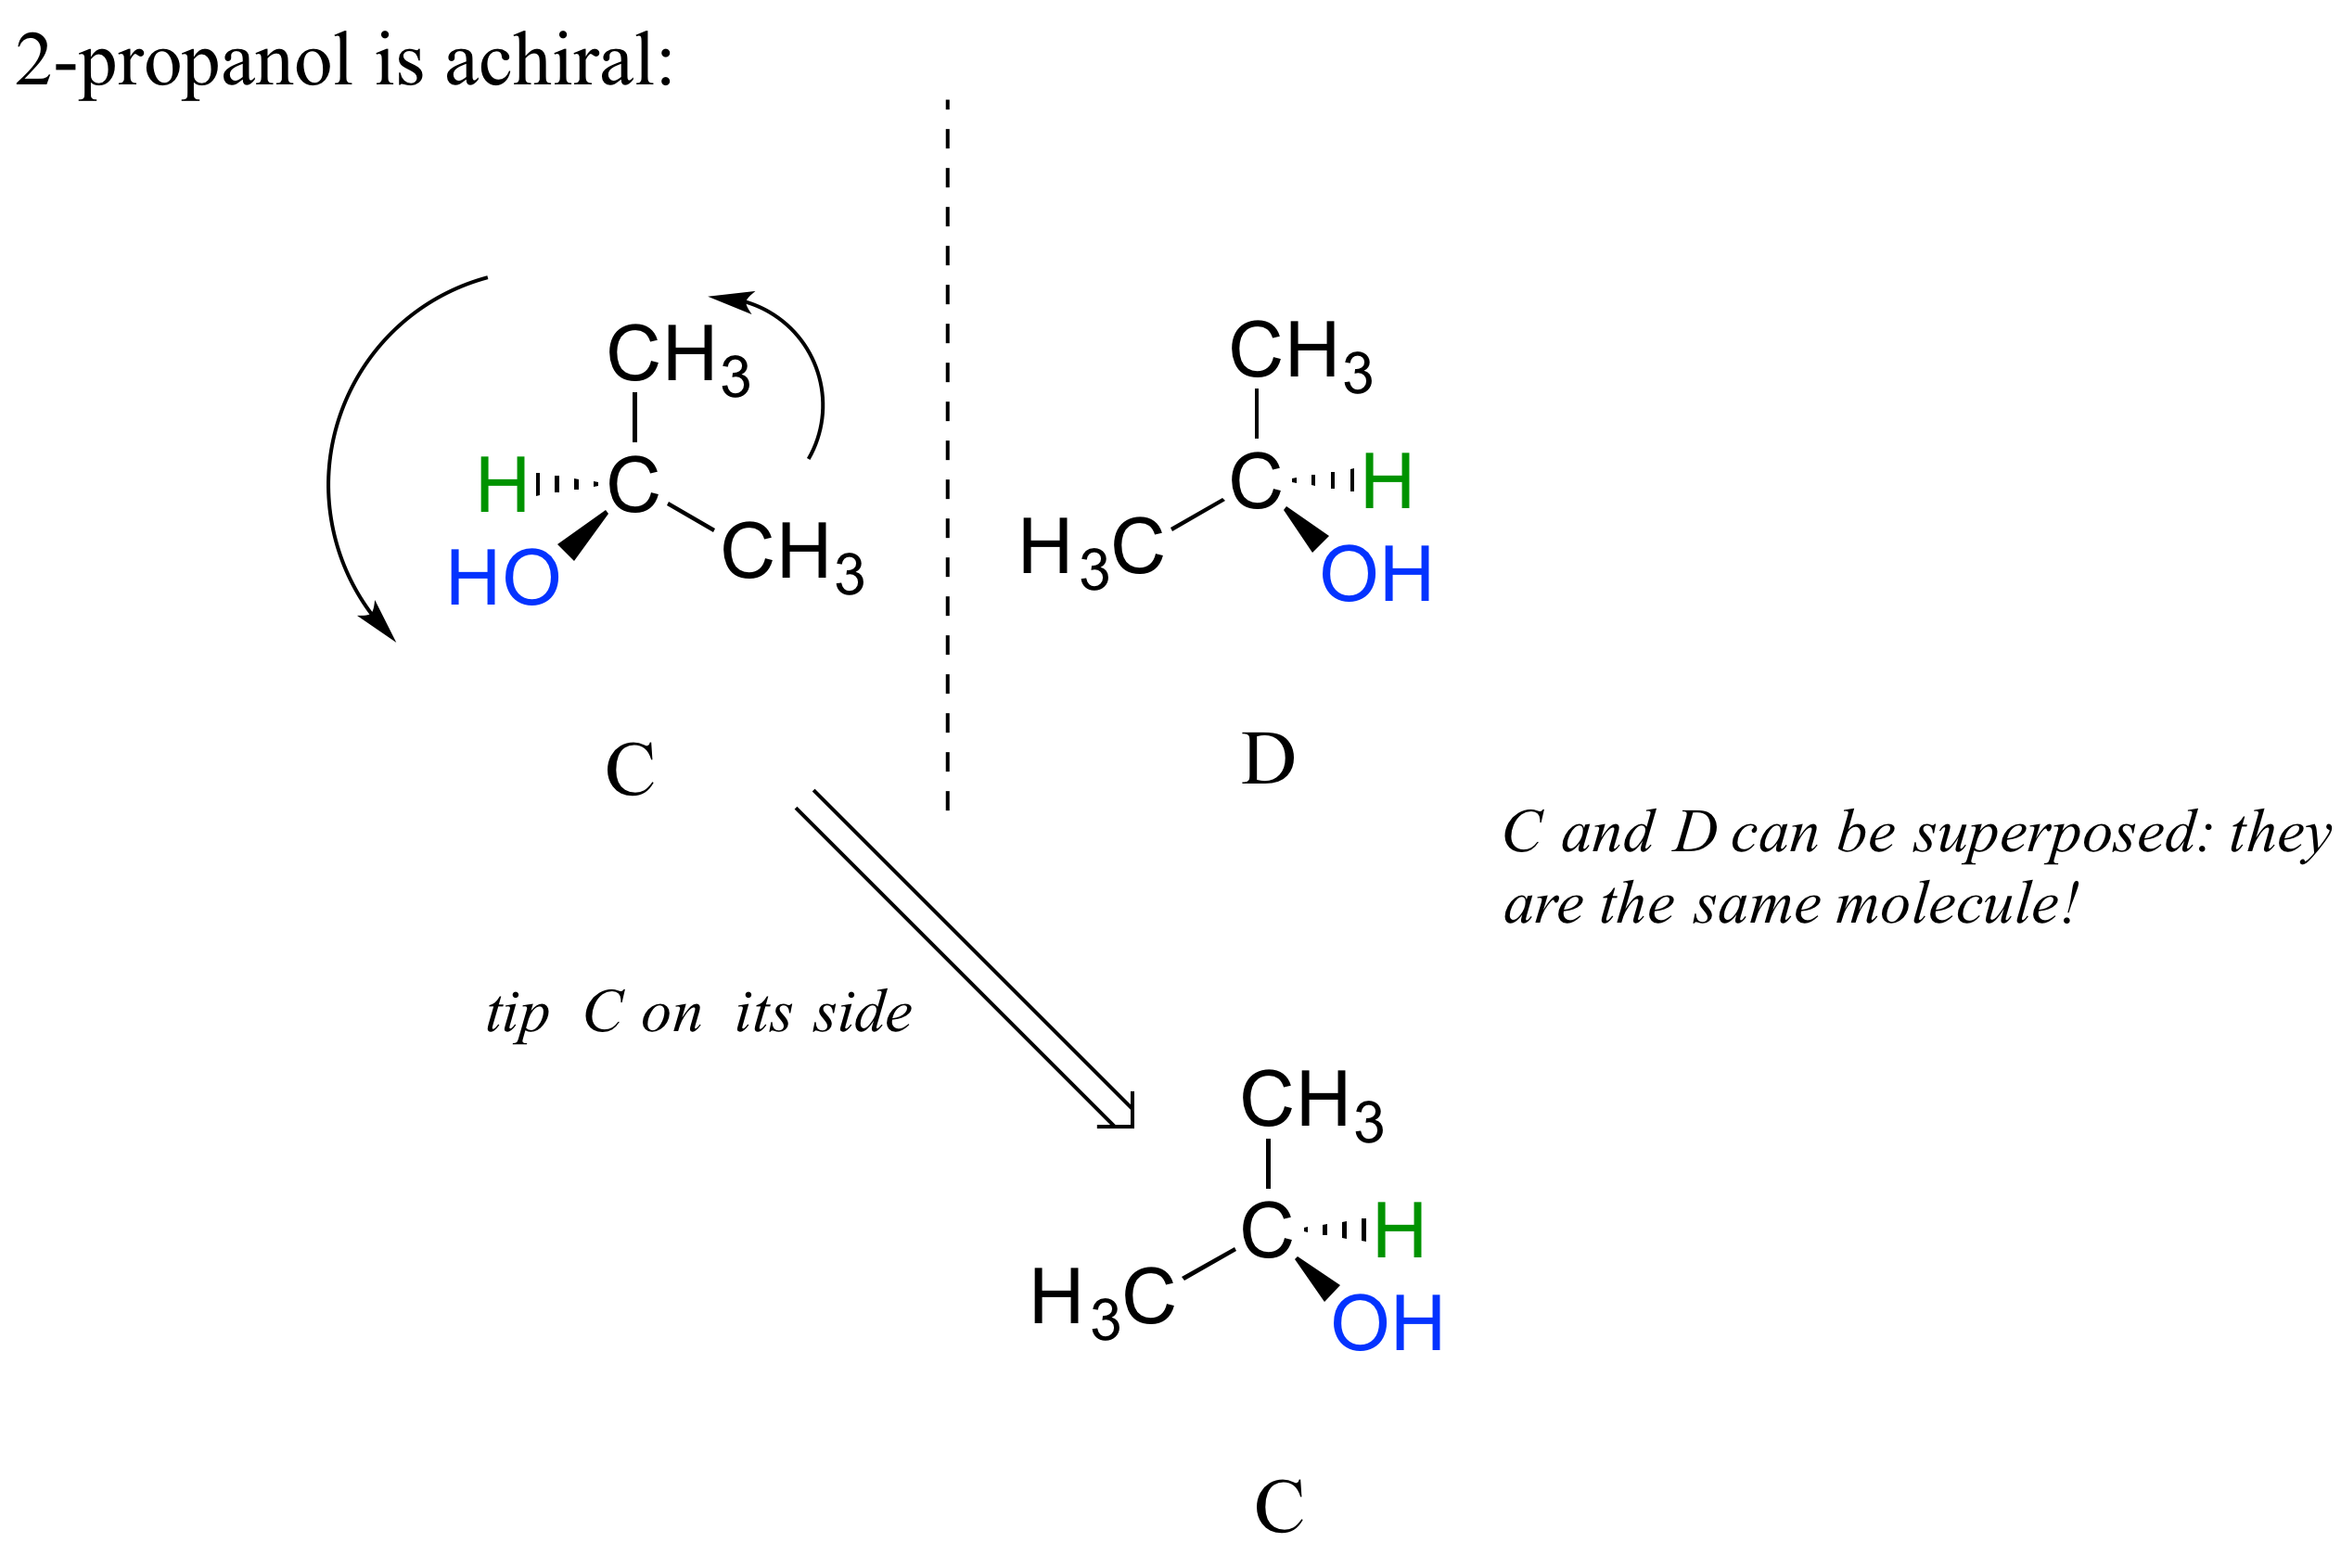 2-propanol (molecule C) and its mirror image (molecule D). Tip C on its side. C and D can be superposed: they are the same molecule. 2-propanol is achiral.